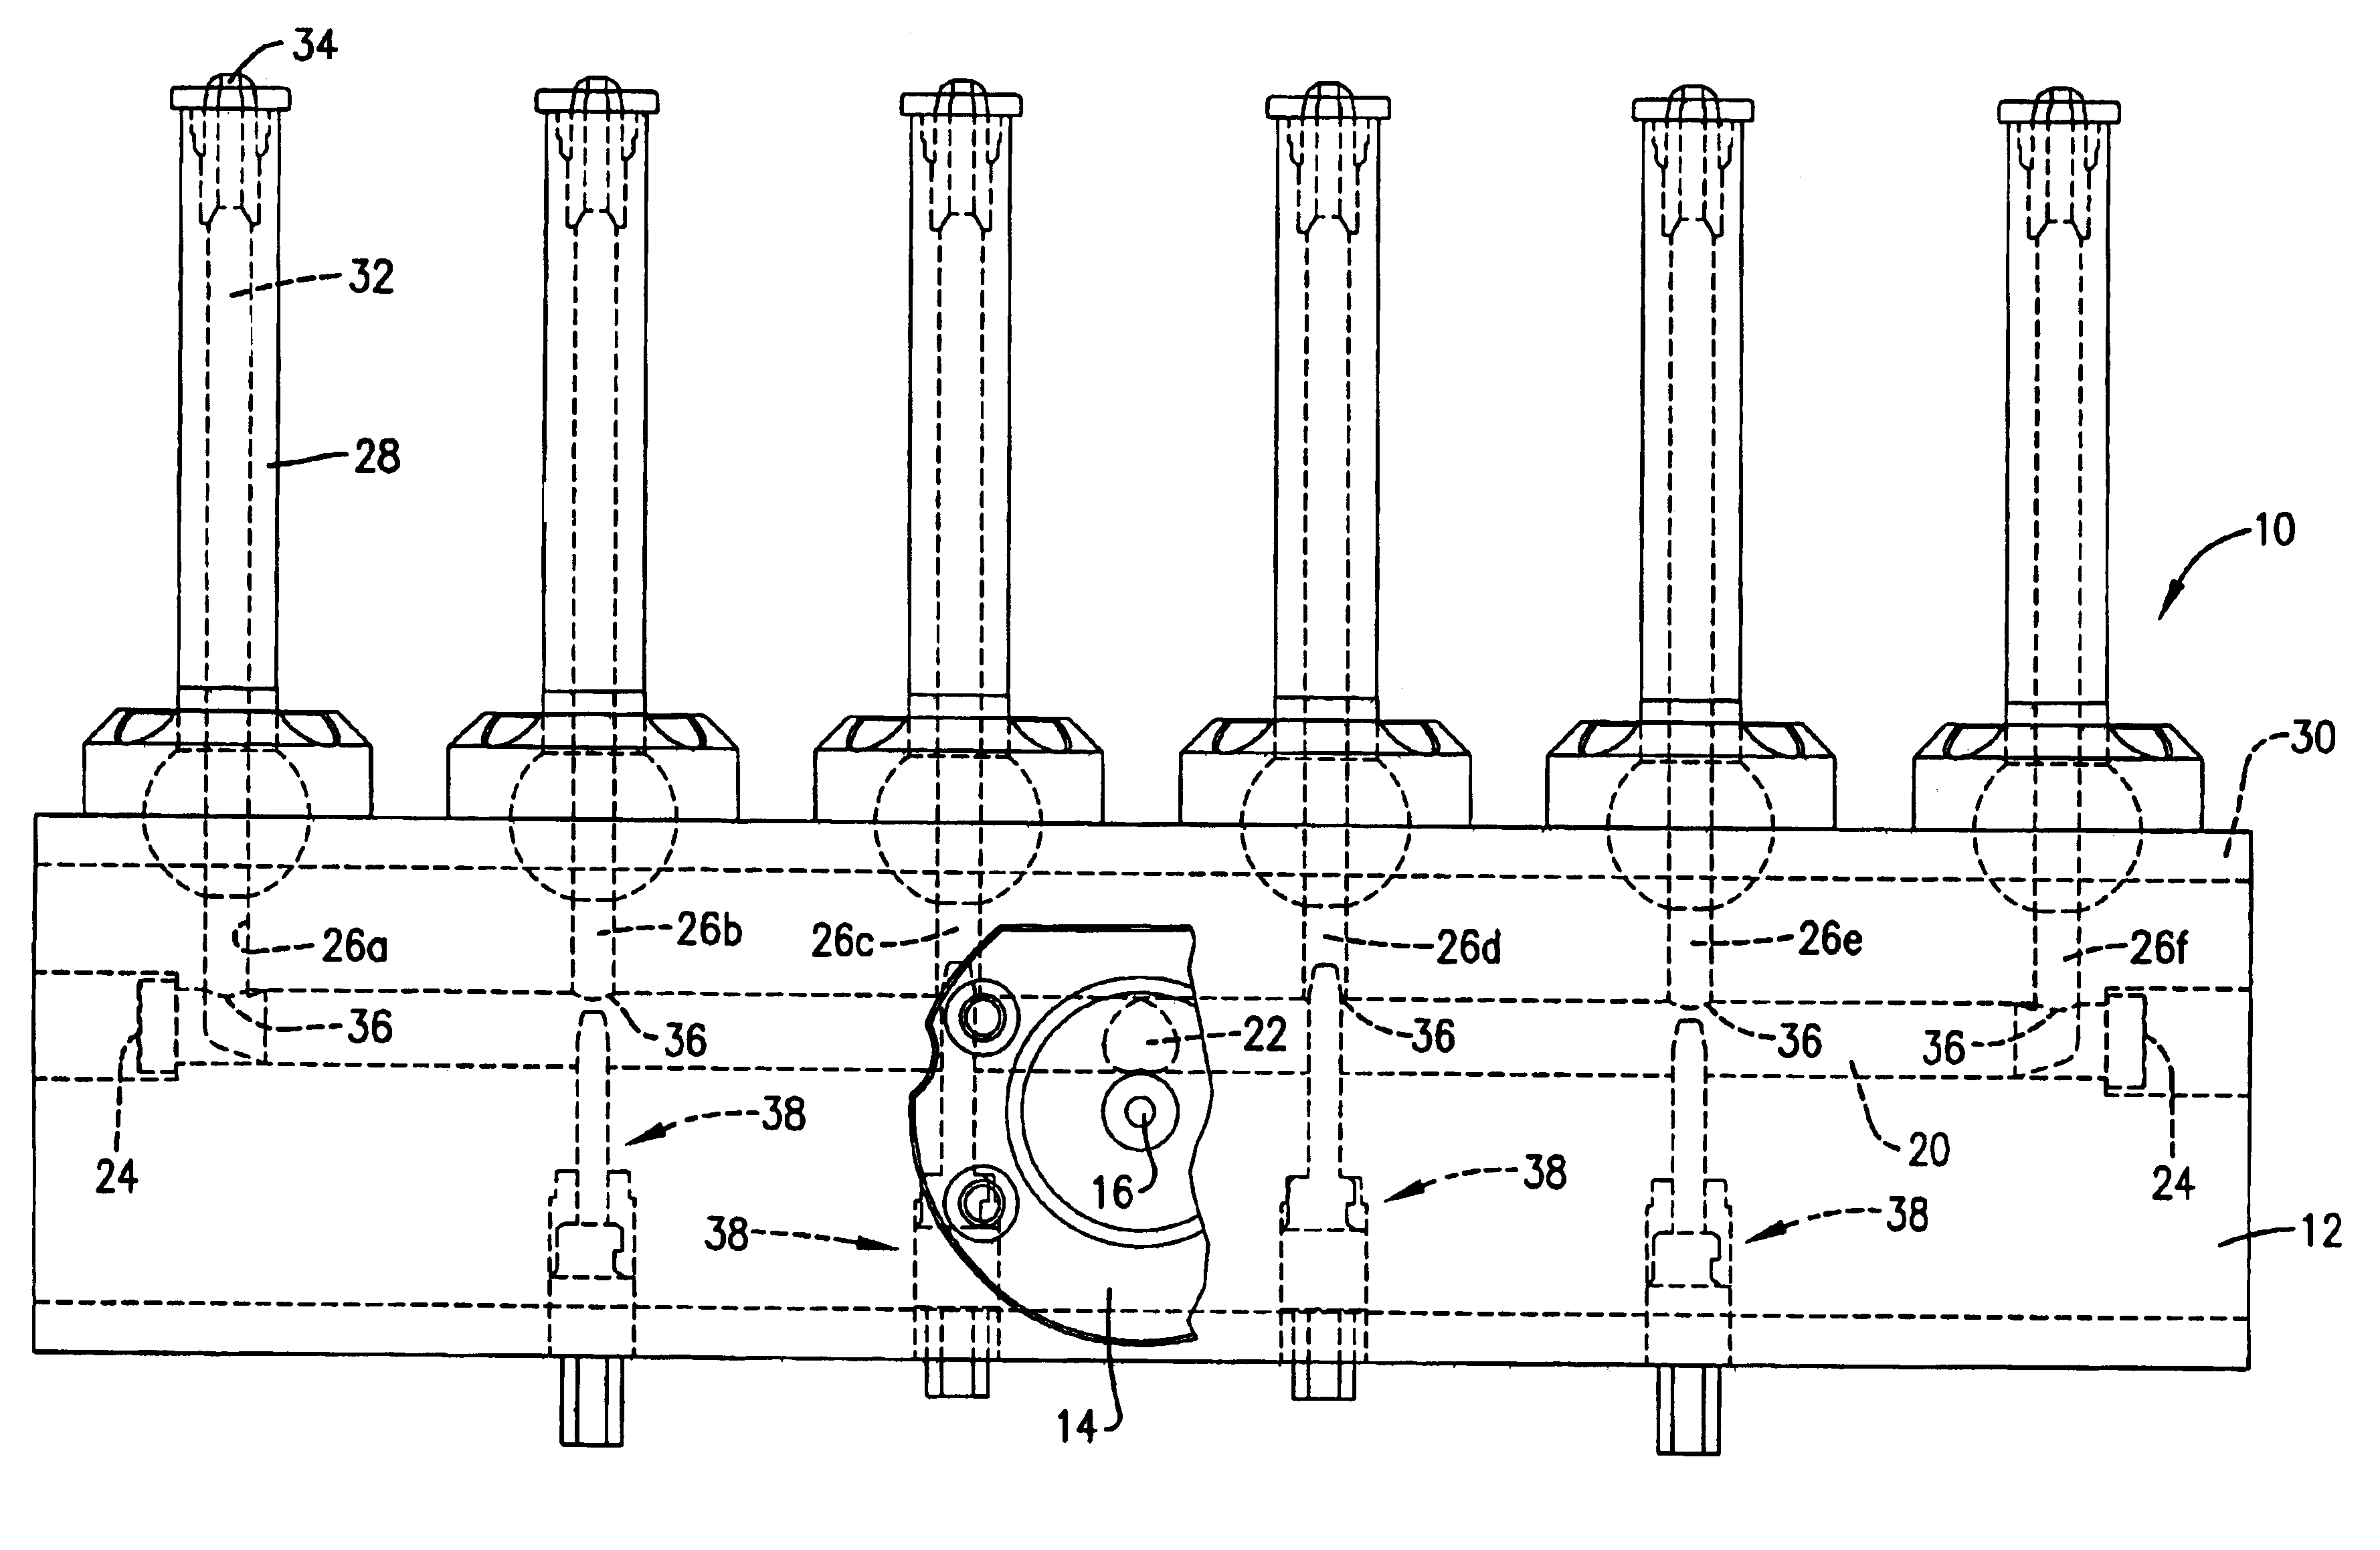 Apparatus for obtaining balanced flow of hot melt in a distribution manifold